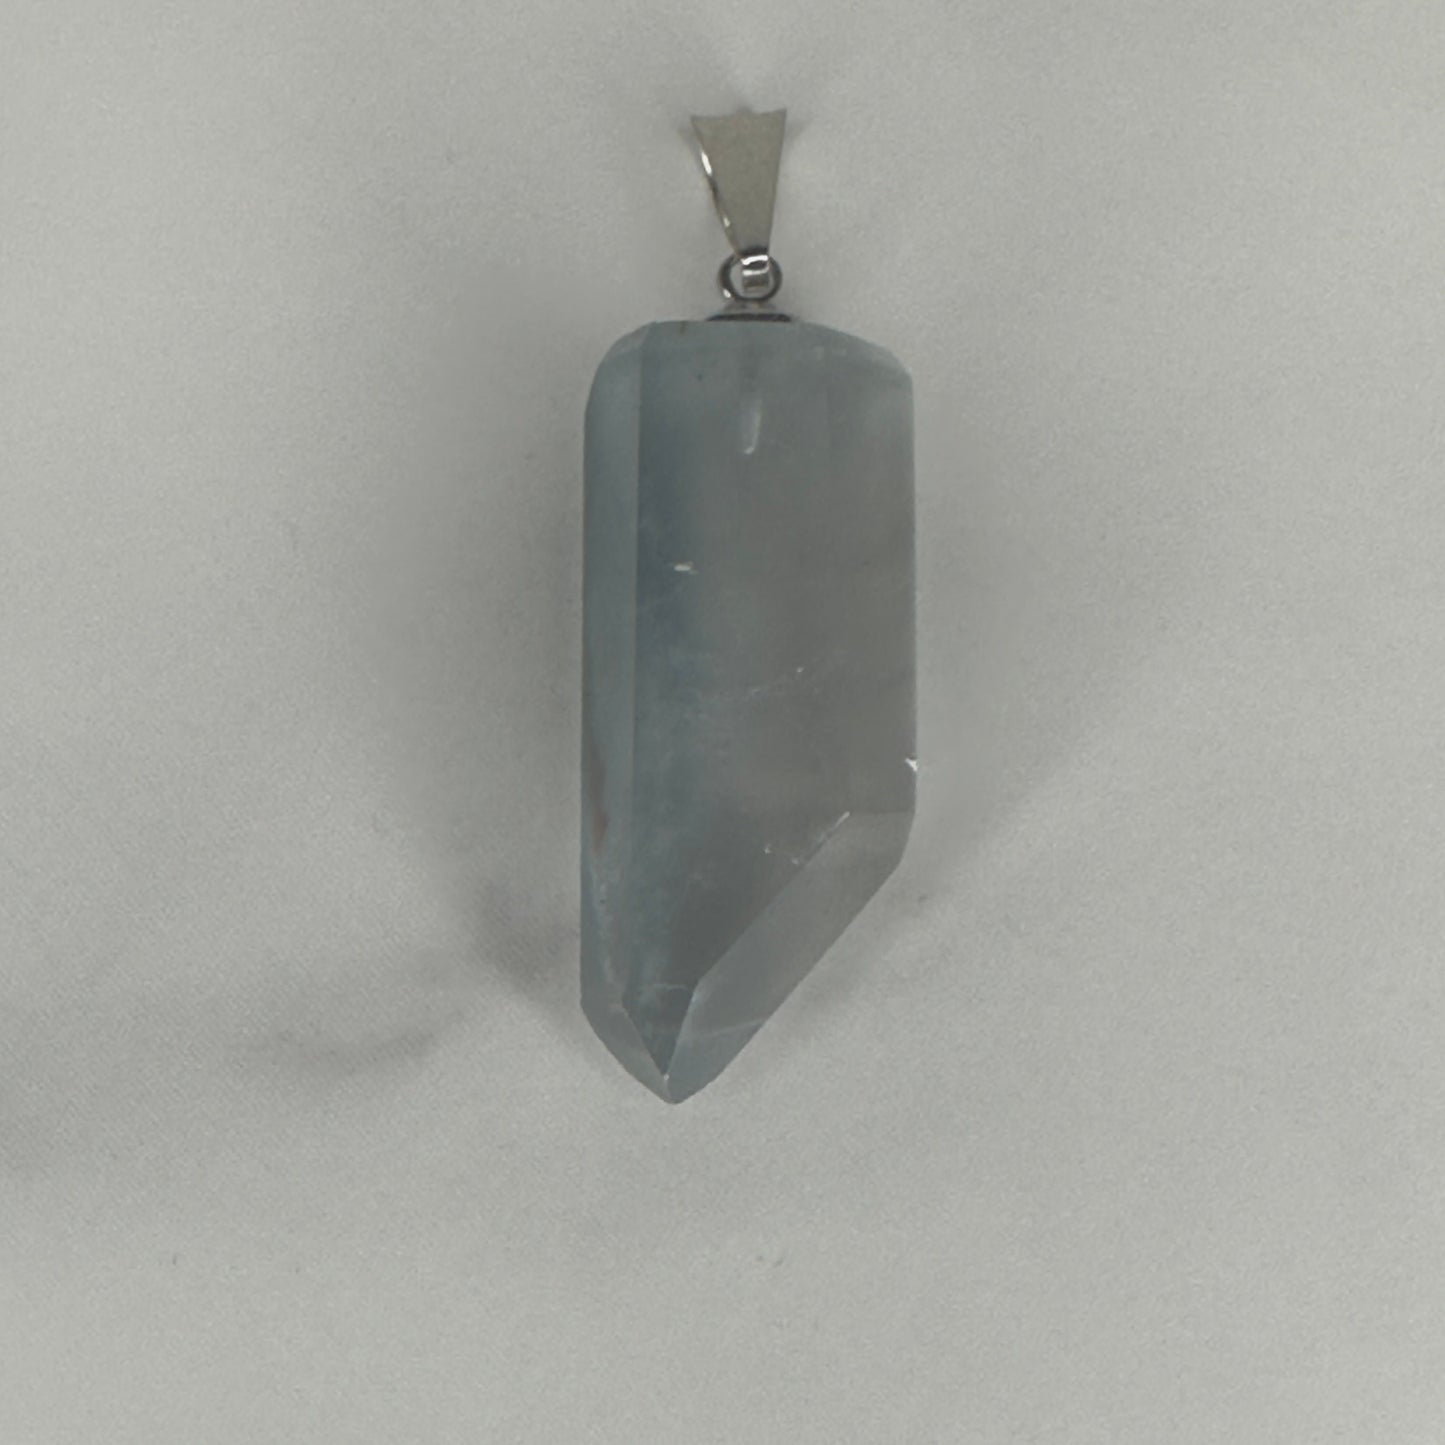 Spectacular Blue Tara Crystal Pendant Genuine Blue Amphibole Jewelry For Necklace From Brazil | Tucson Gem Show Exclusive